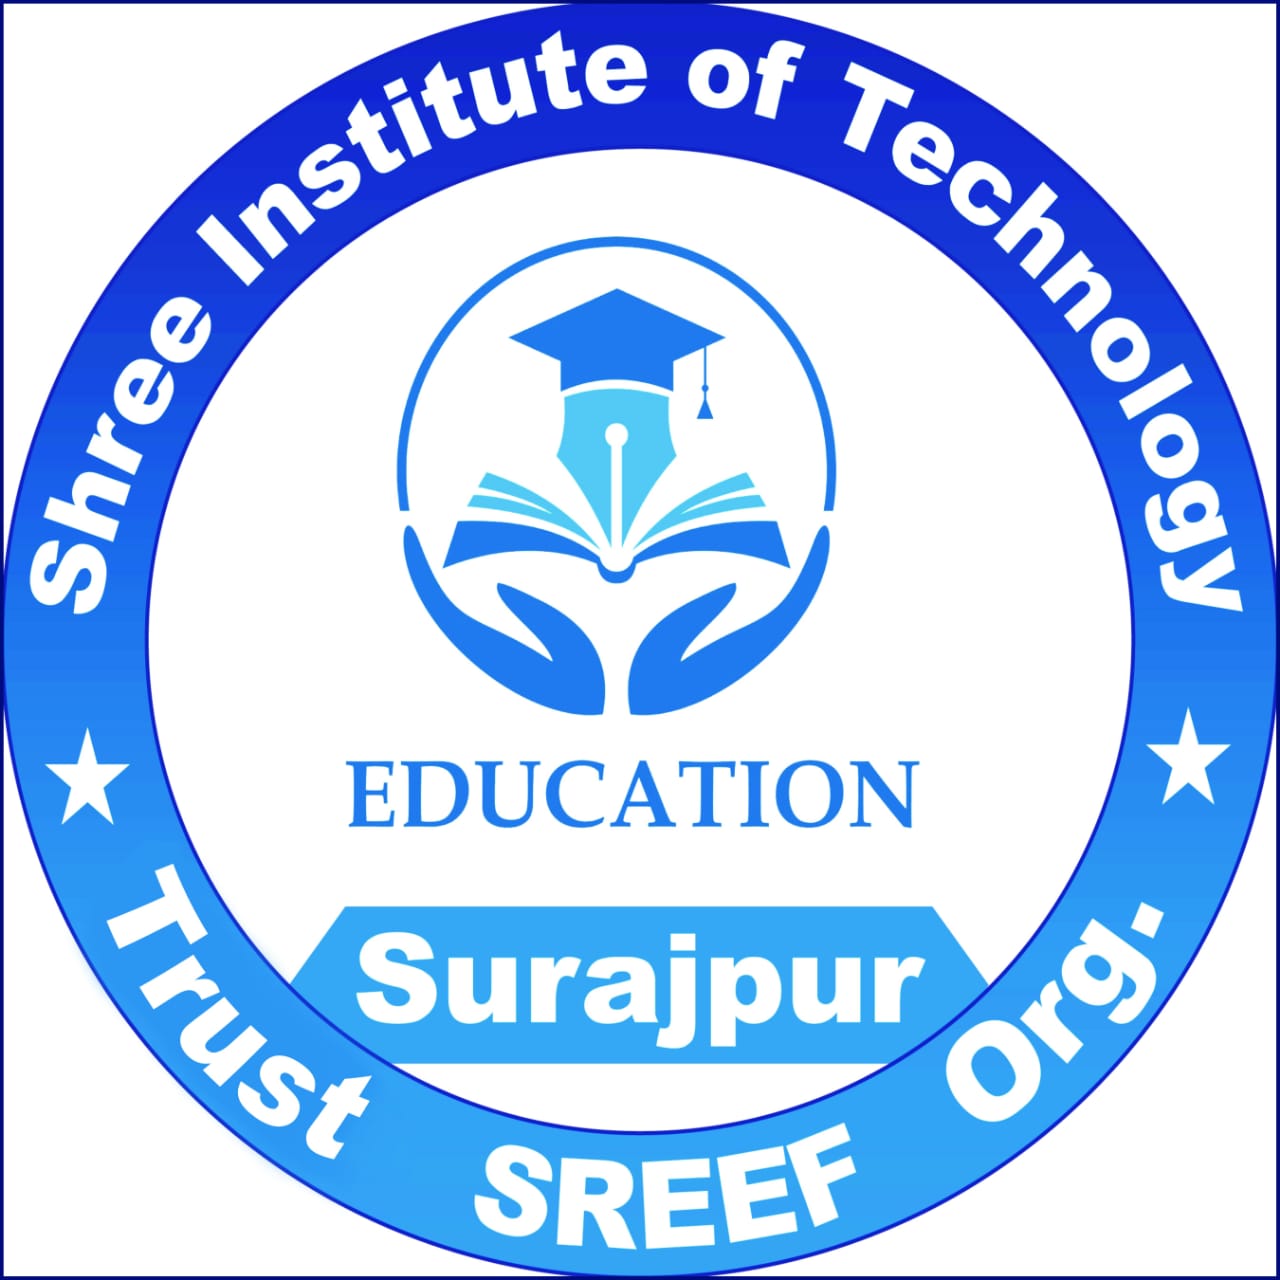 Shree Institute of Technology